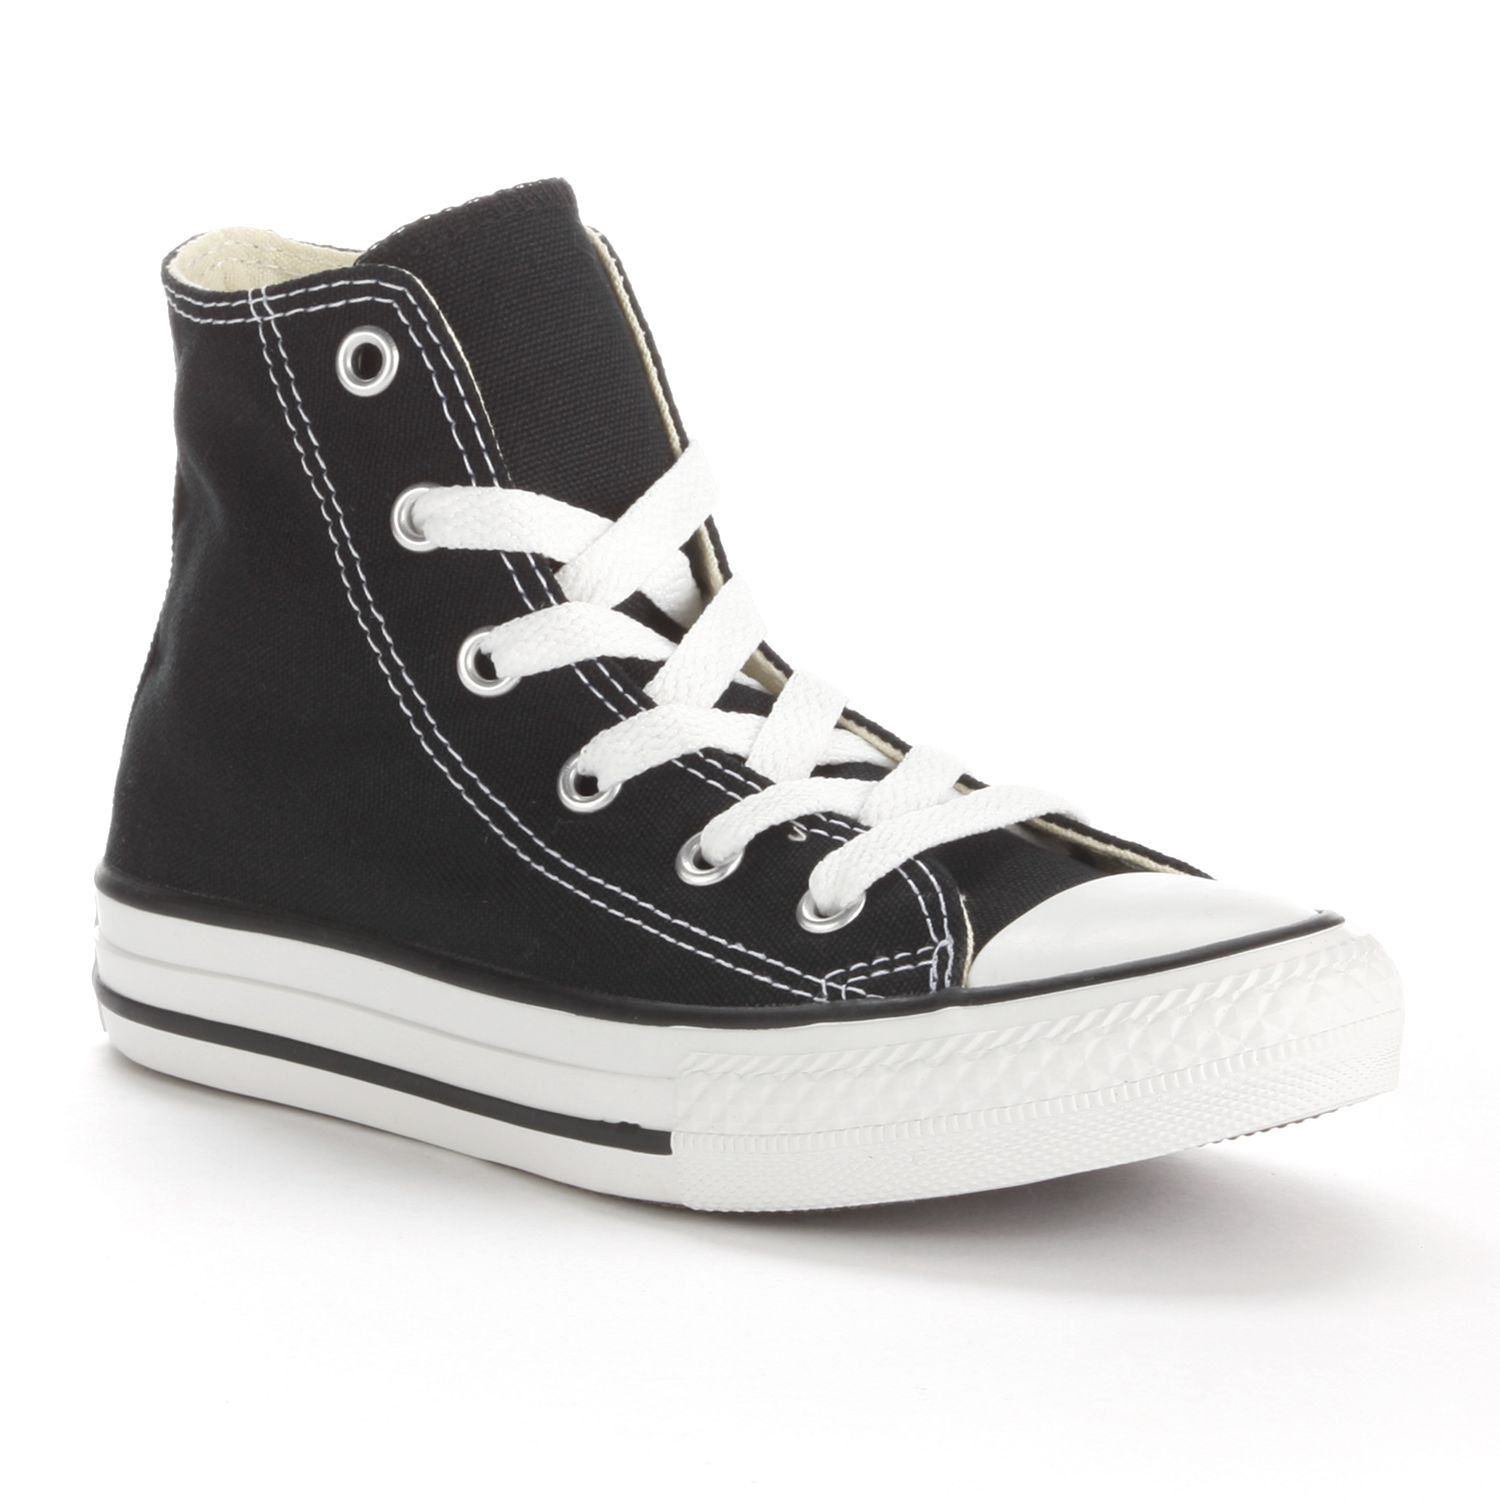 chuck taylor all star high top white